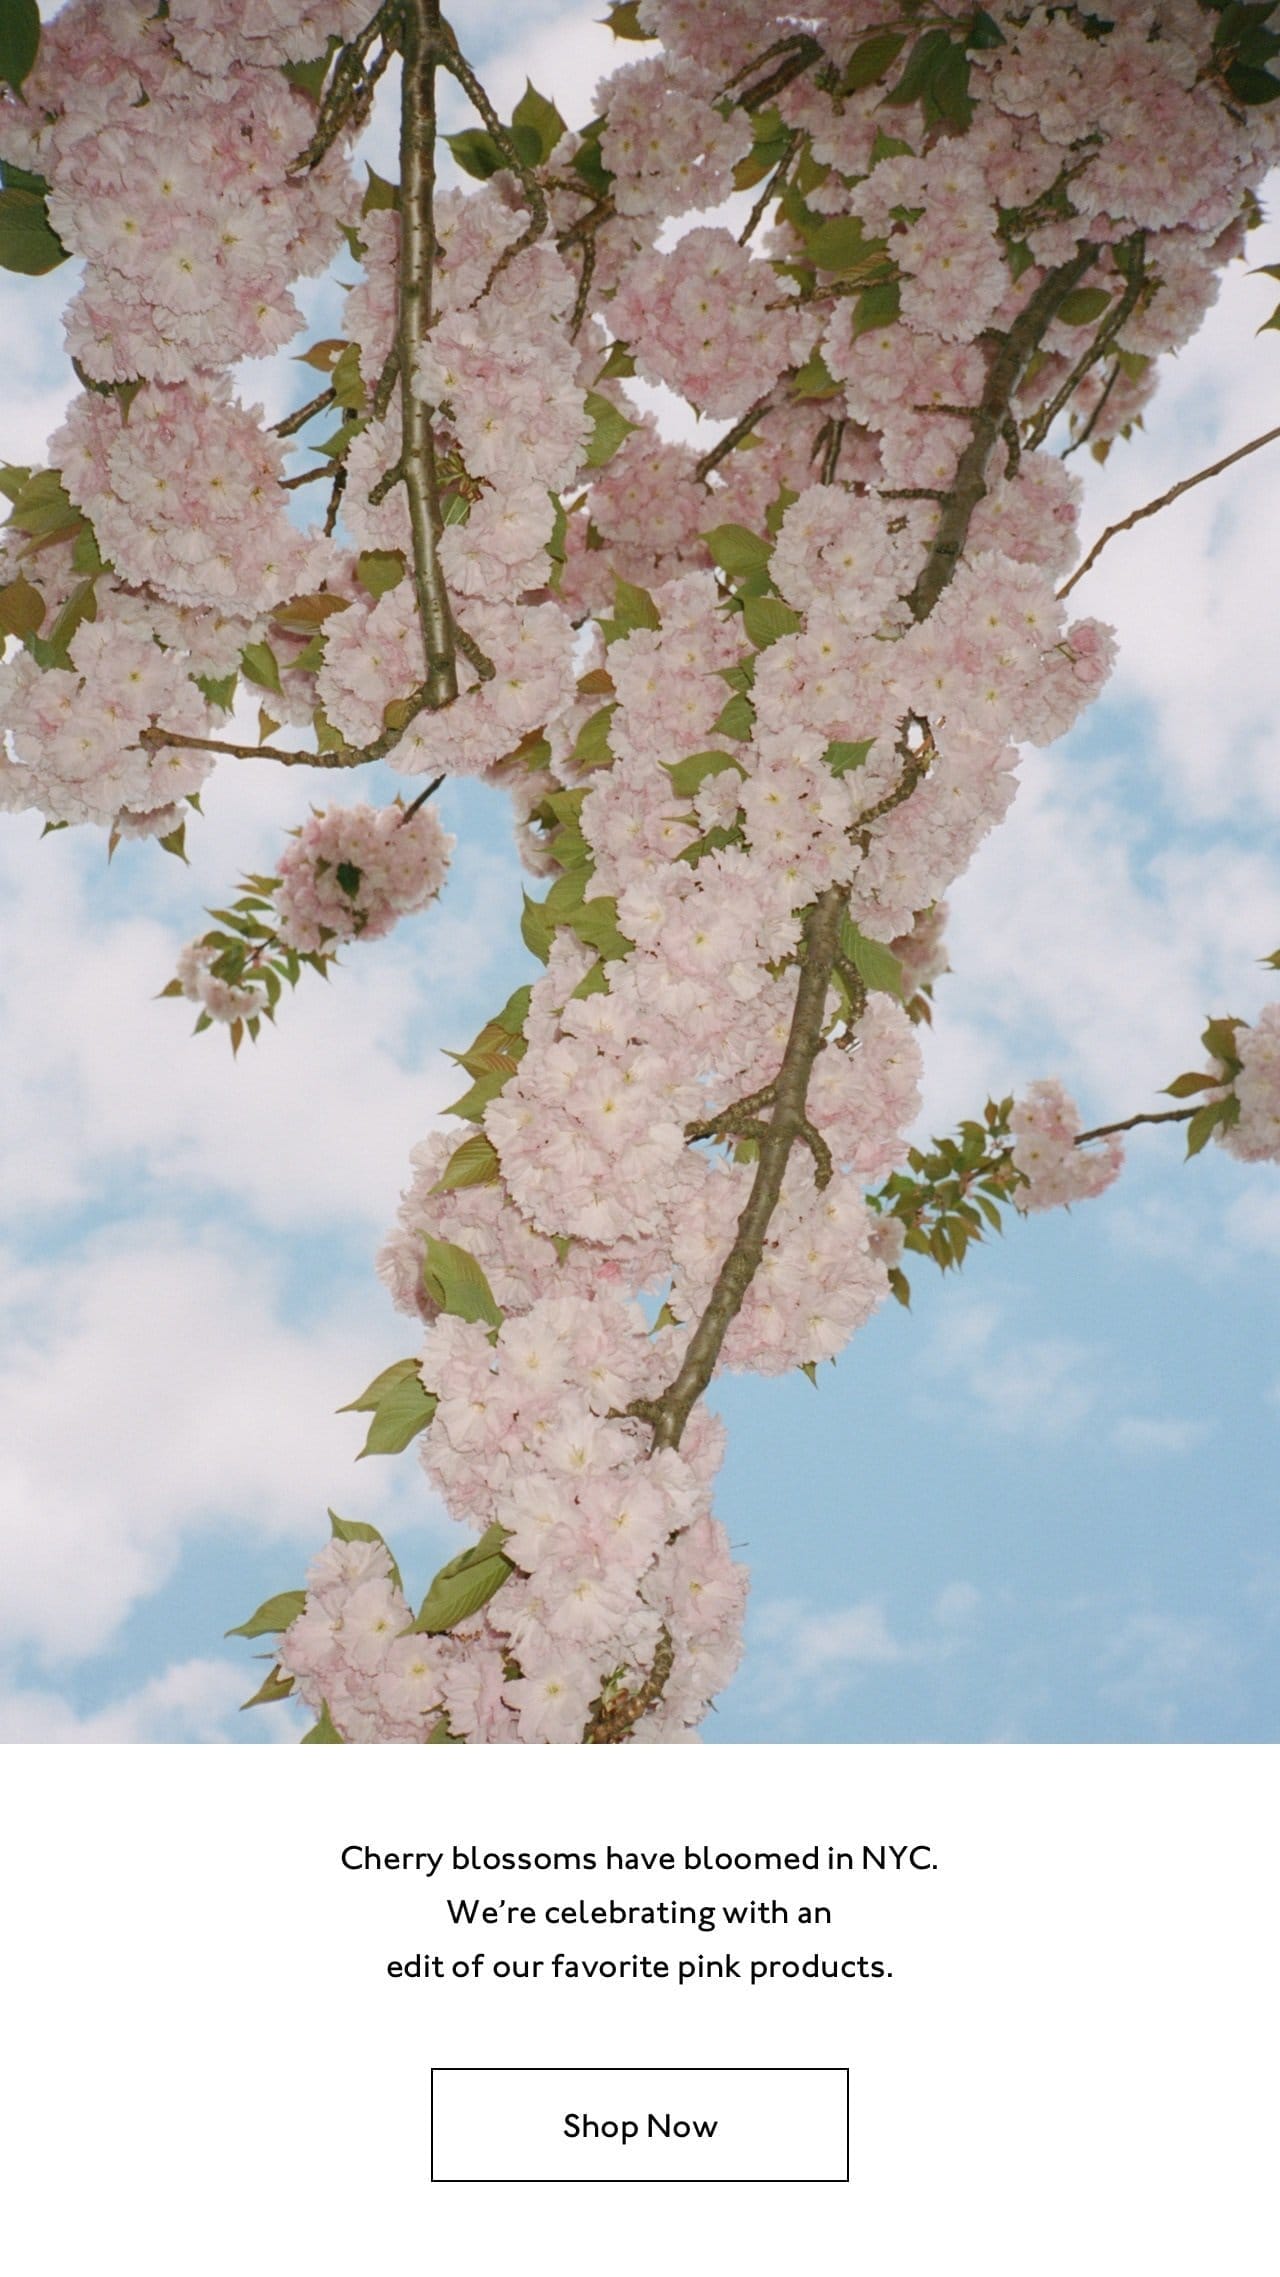 Cherry blossoms have bloomed in NYC. We're celebrating with an edit of our favorite pink products.